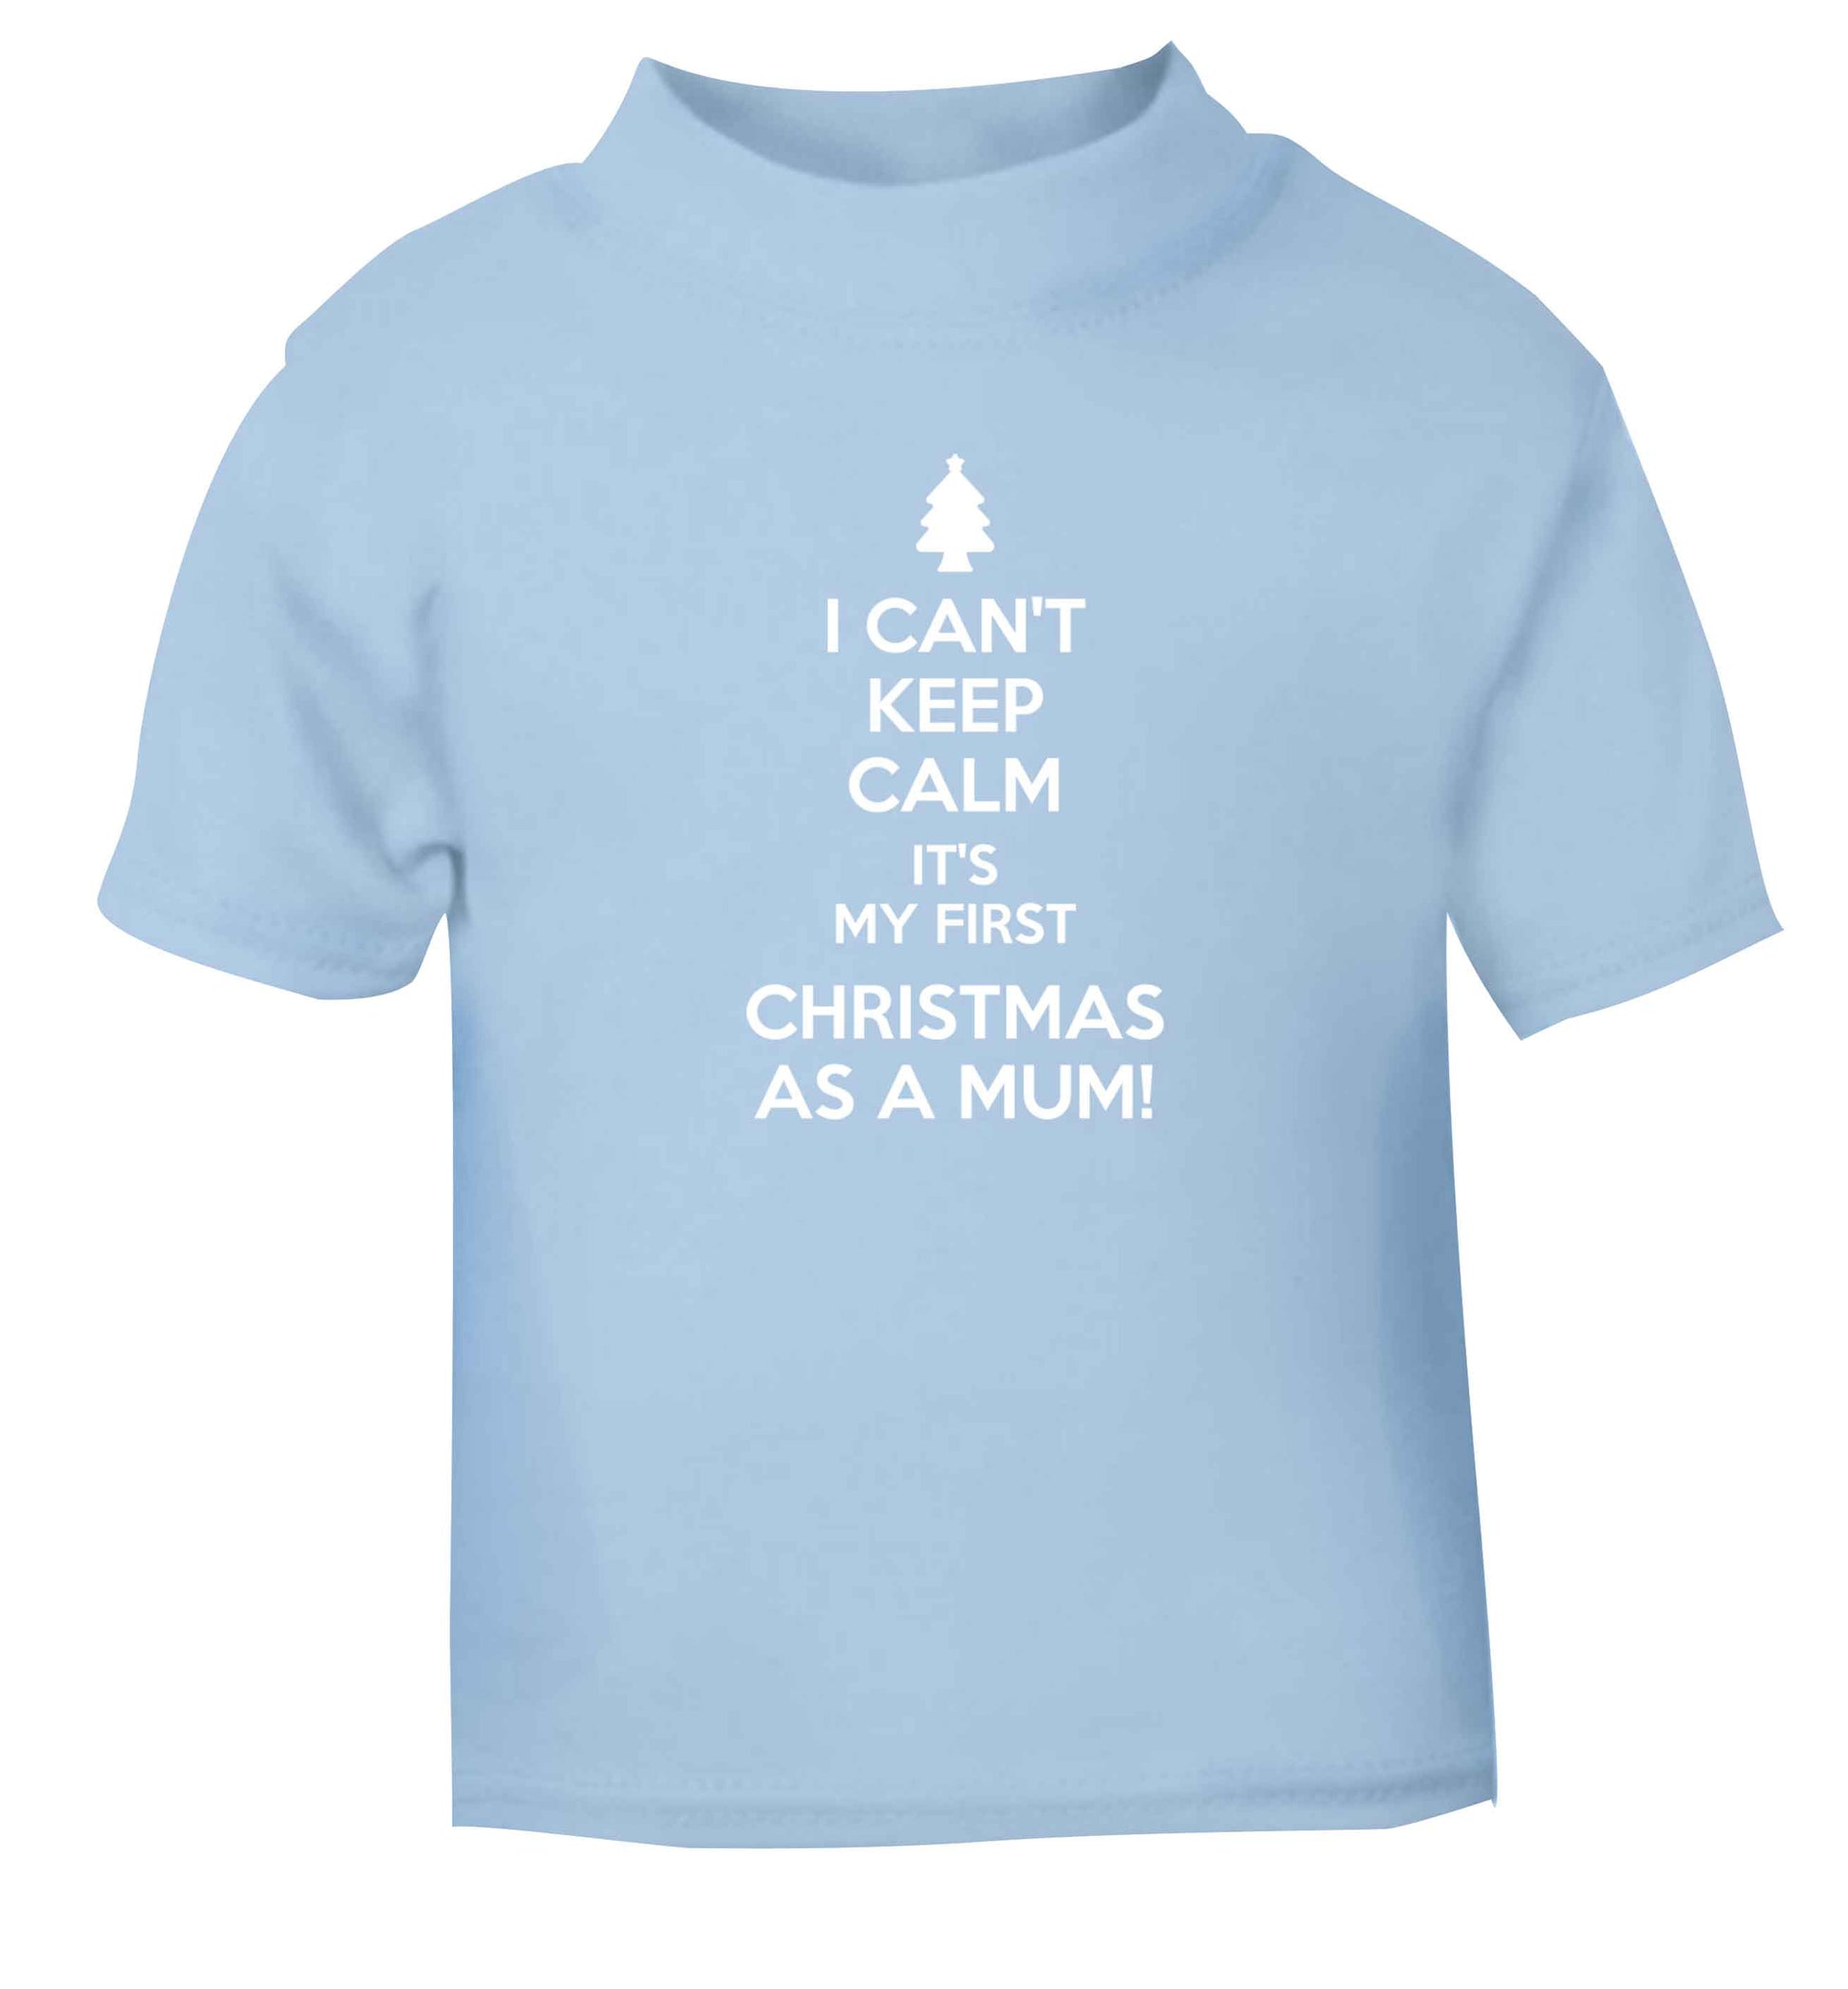 I can't keep calm it's my first Christmas as a mum light blue Baby Toddler Tshirt 2 Years